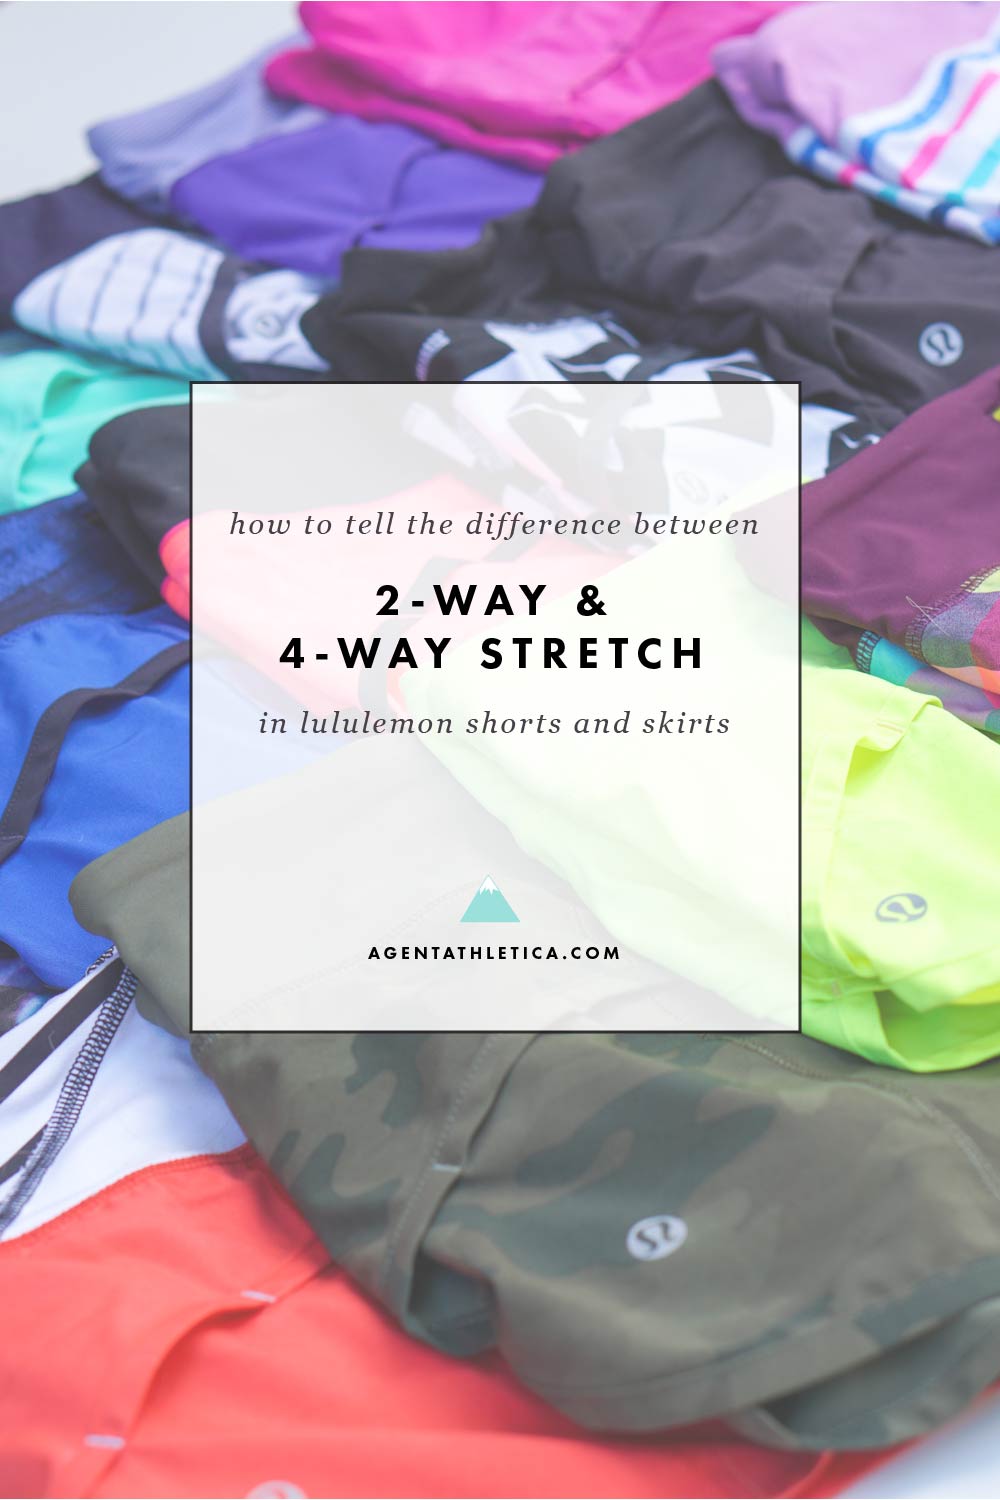 How to Tell the Difference between Lululemon 2-Way and 4-Way